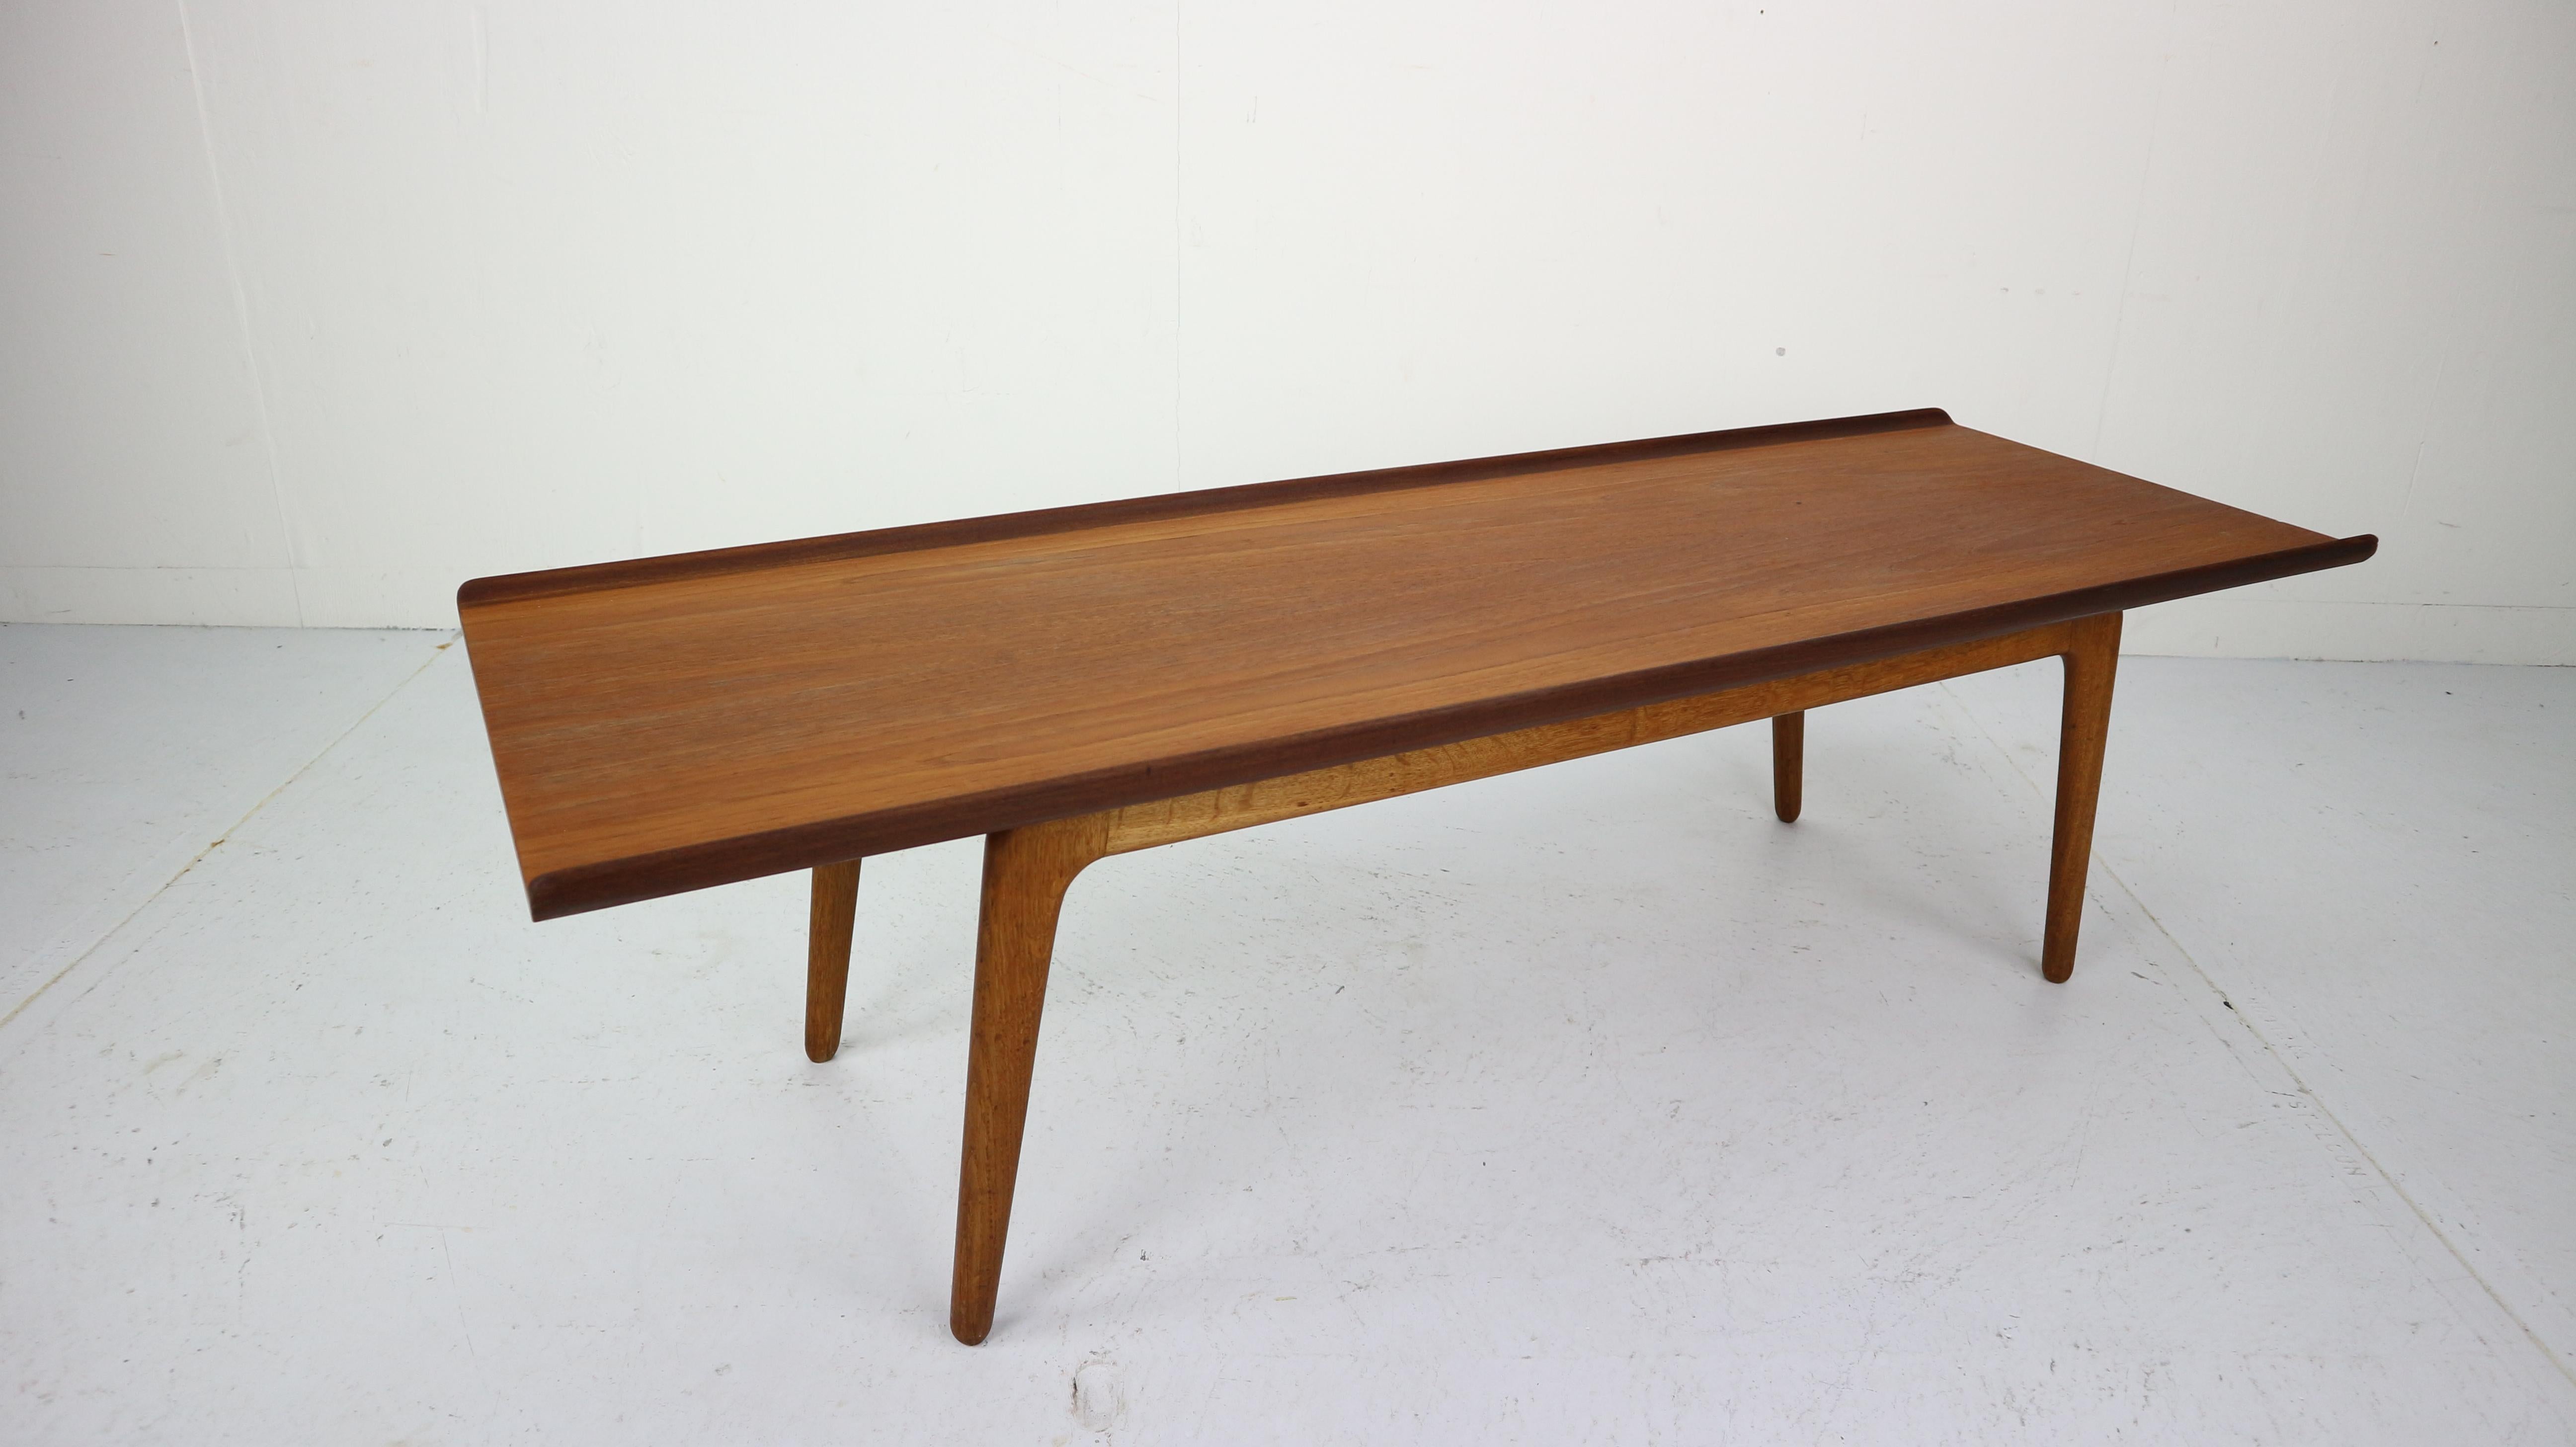 This original solid coffee table in teak with 'boomerang' oak legs was designed by the Danish designer Aksel Bender Madsen and manufactured by Bovenkamp in The Netherlands in the 1960s. The tabletop features very elegant curved edges on the long